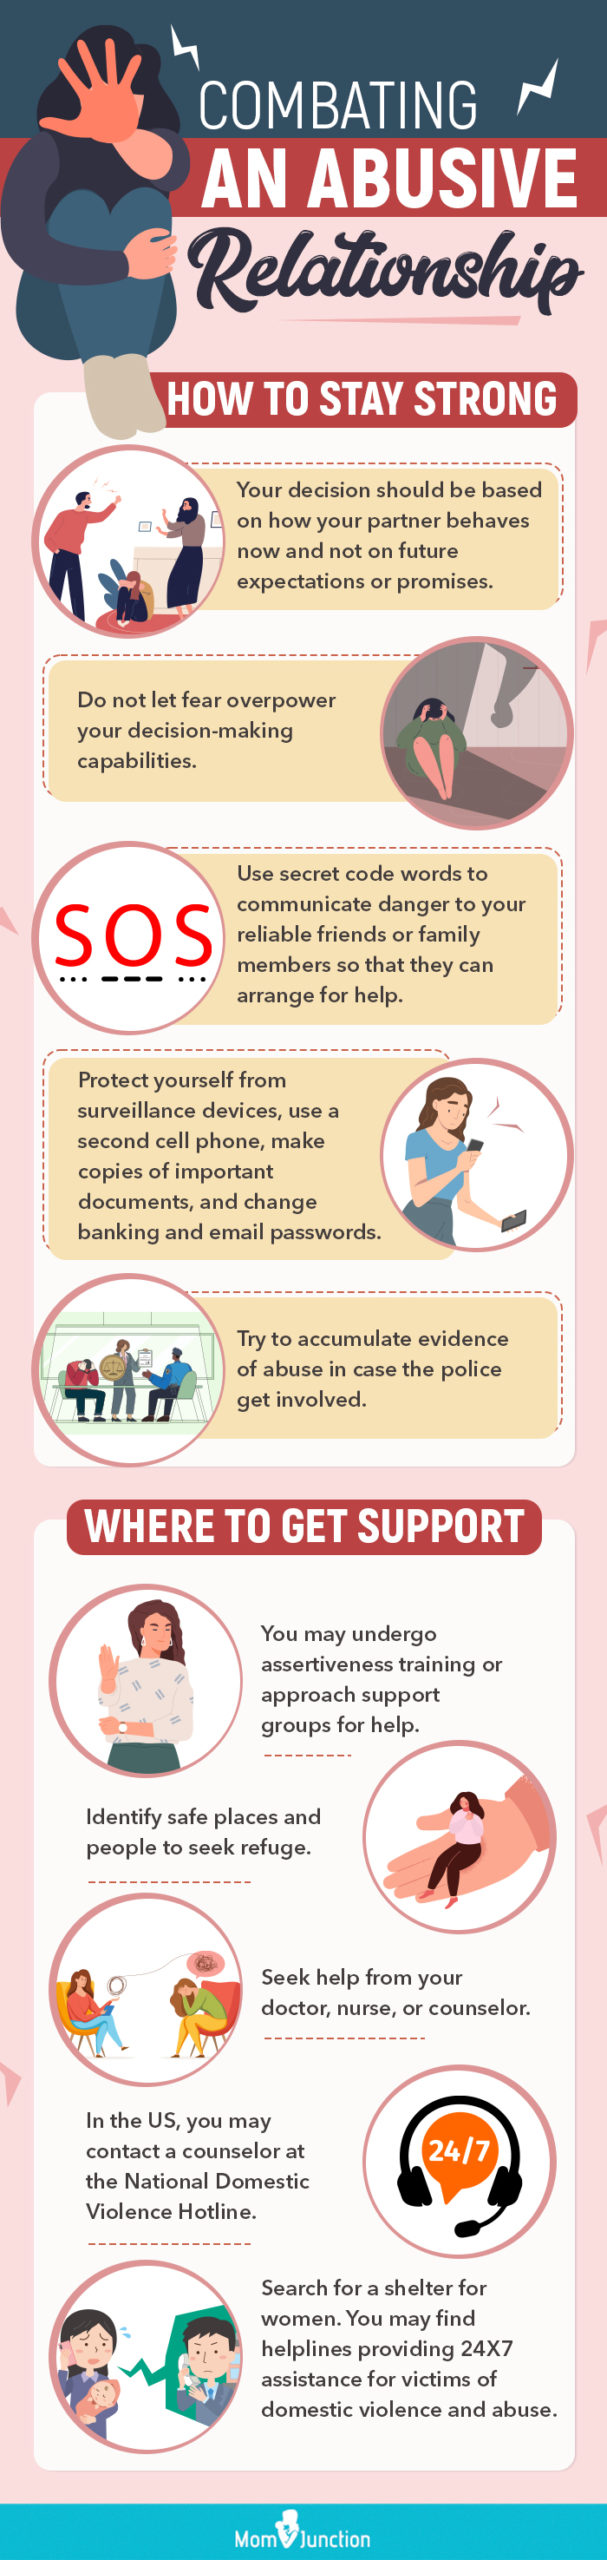 combating an abusive relationship [infographic]